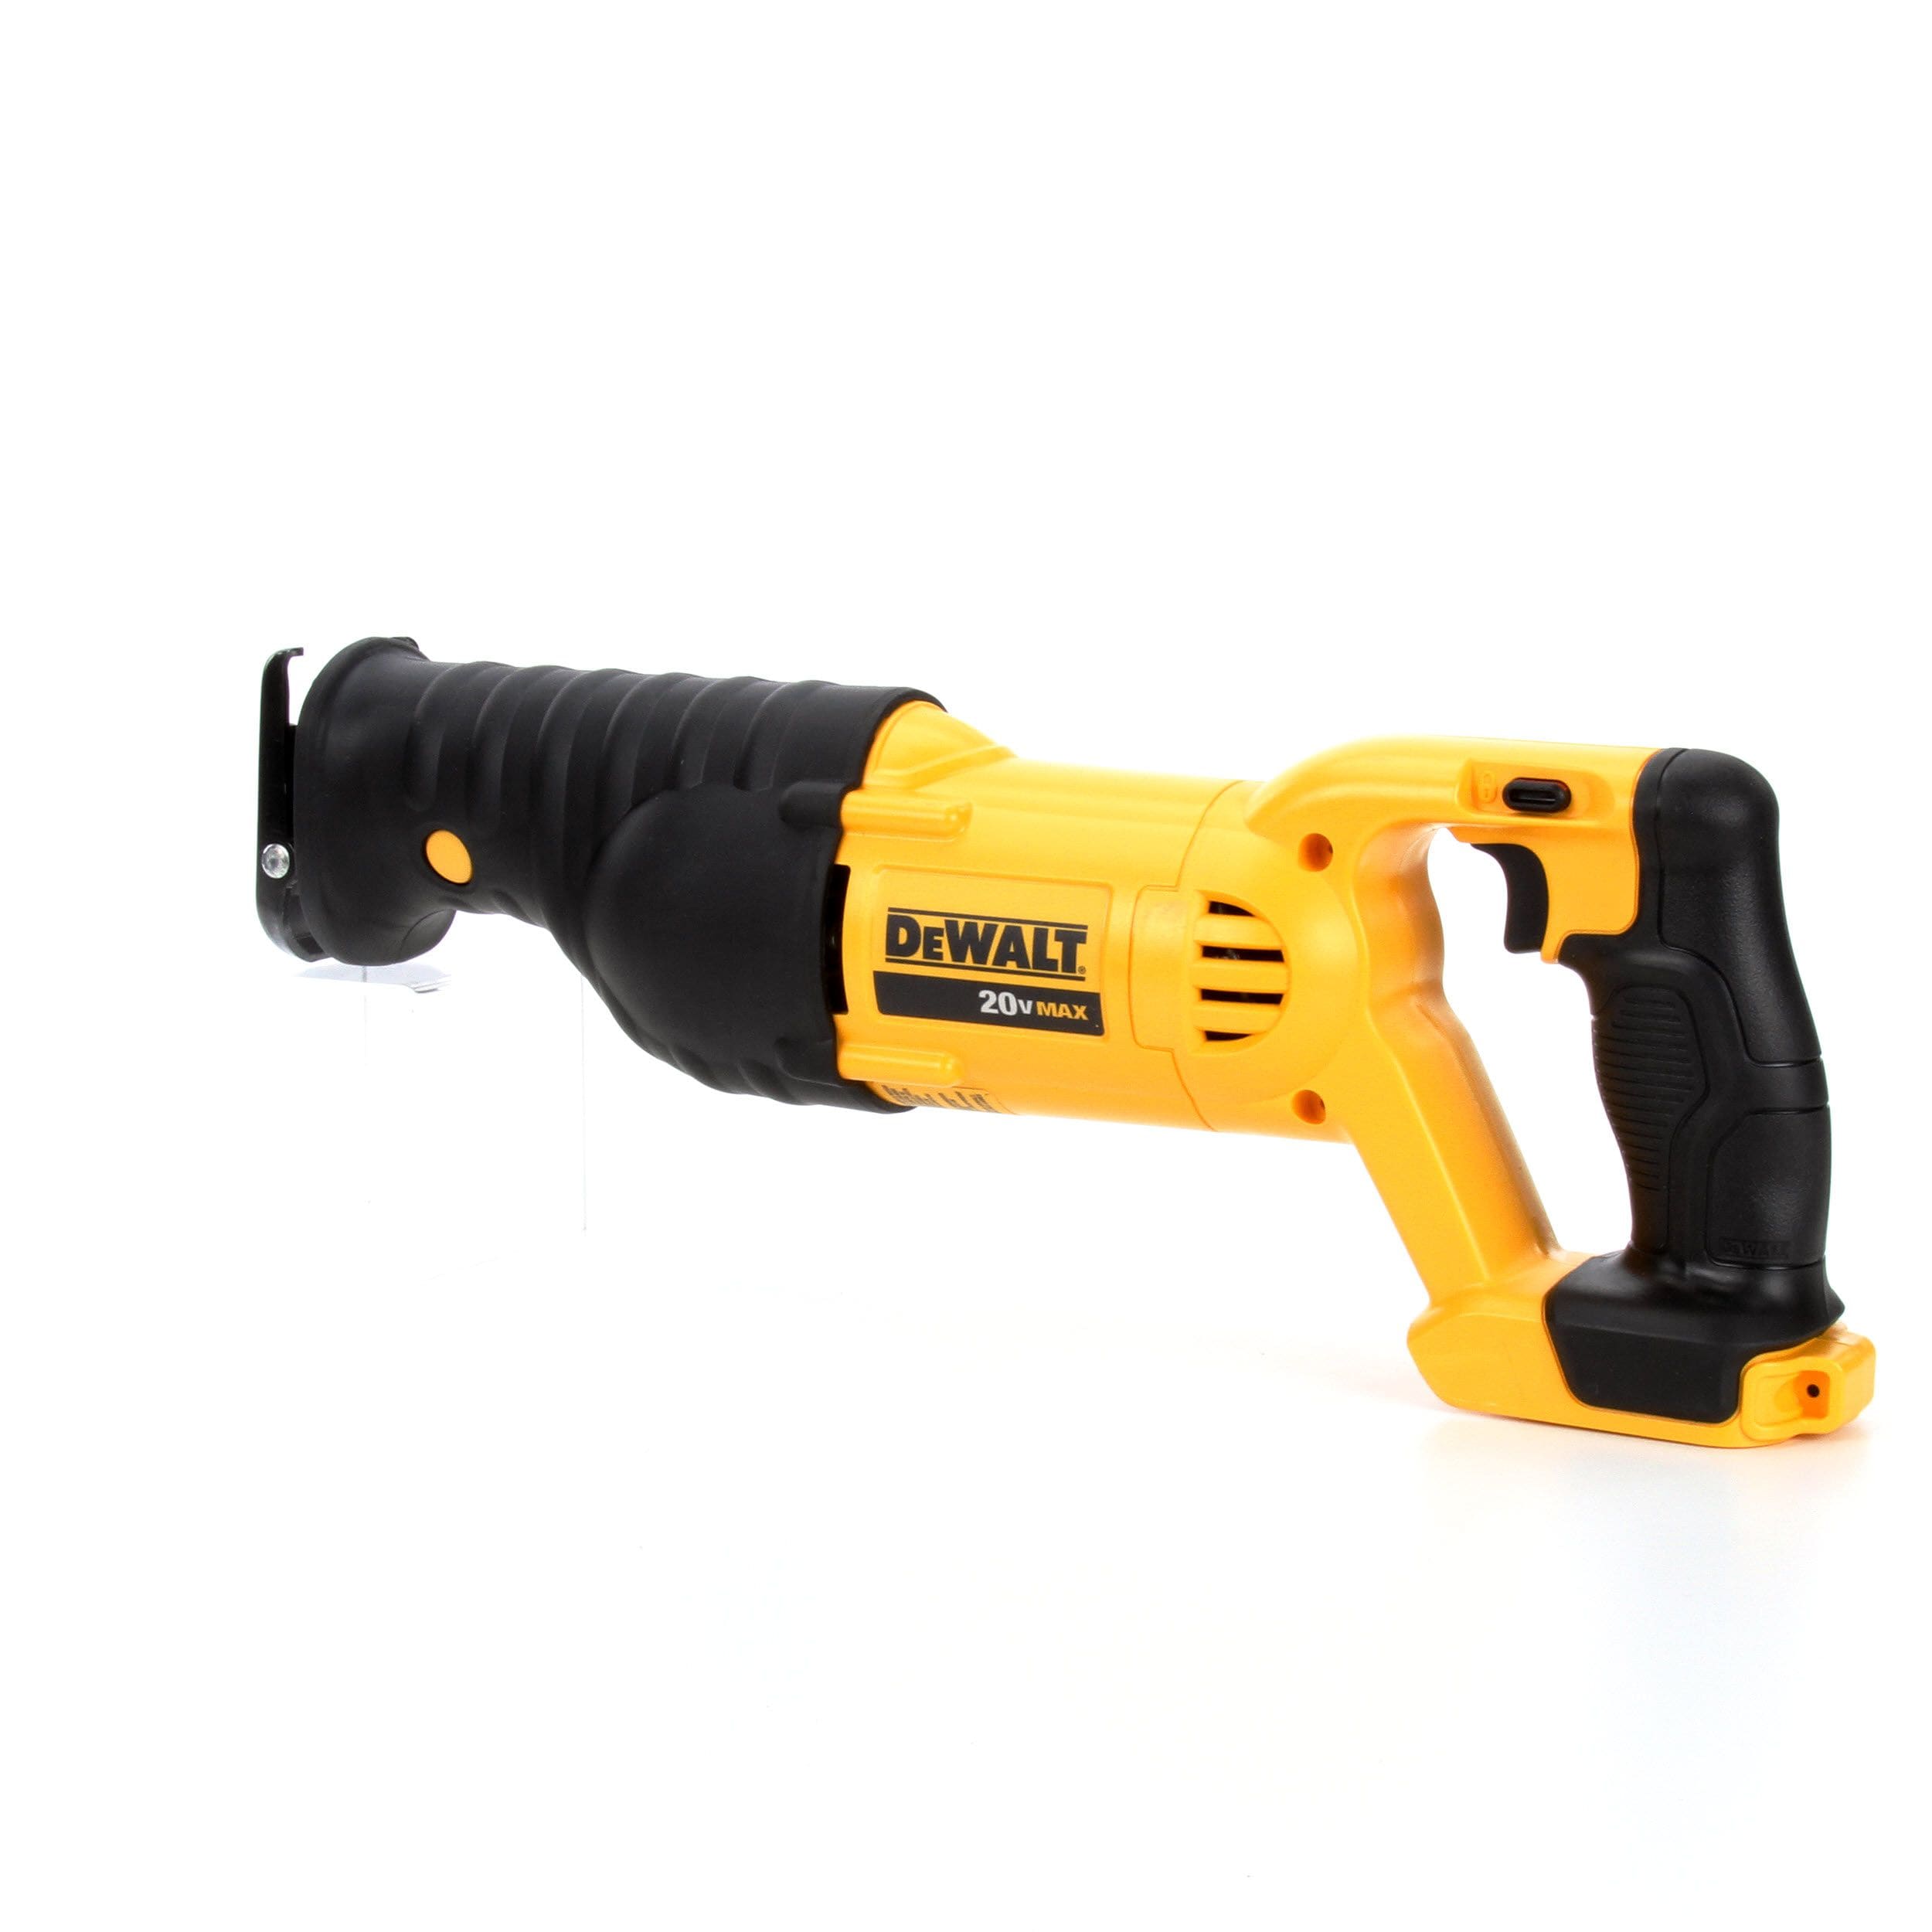 Samuel Inzichtelijk krom DEWALT 20-volt Max Variable Speed Cordless Reciprocating Saw (Tool Only) in  the Reciprocating Saws department at Lowes.com